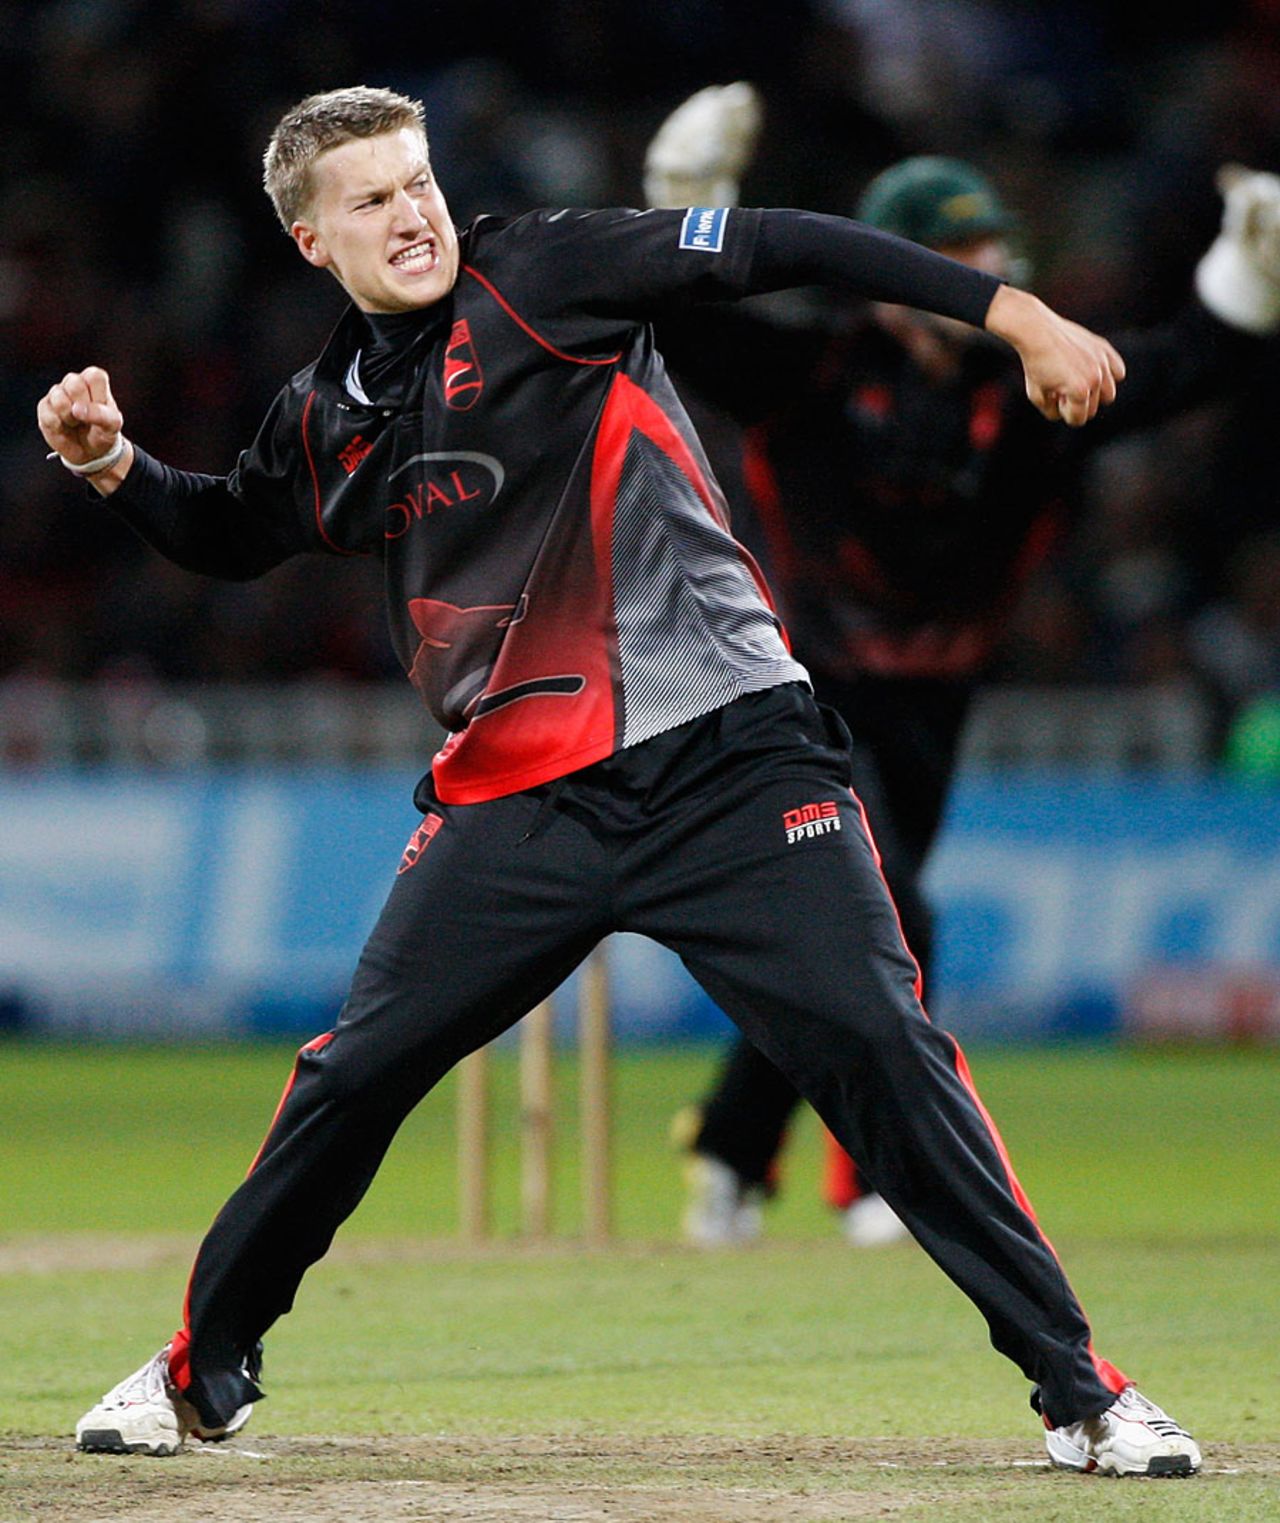 Josh Cobb took four wickets in a man-of-the-match performance that gave Leicestershire the title, Leicestershire v Somerset, Final, Friends Life t20, Edgbaston, August 27 2011